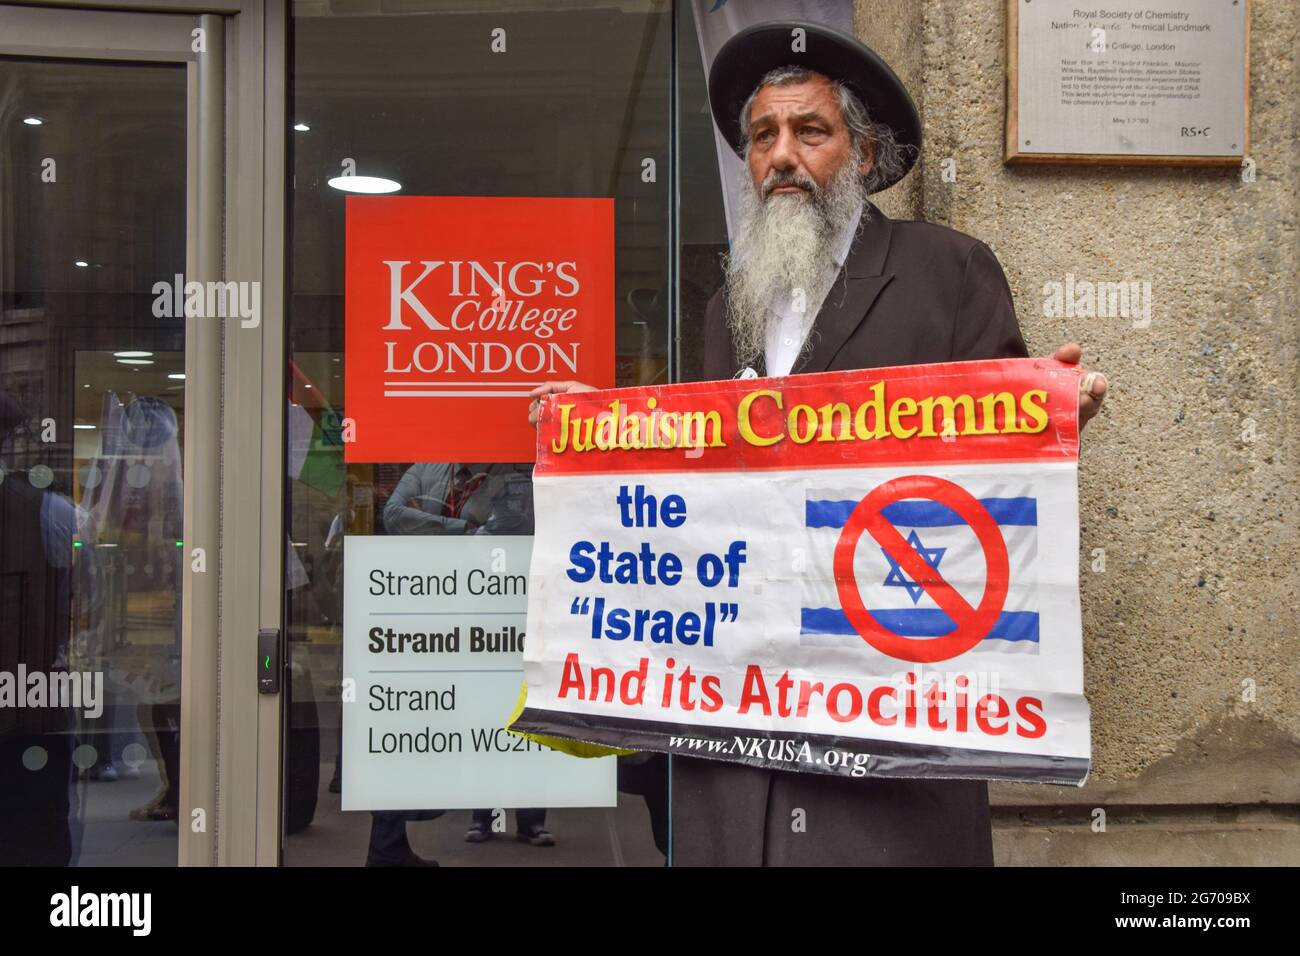 London, UK. 9th July 2021. An anti-Zionist Jewish demonstrator outside King's College London during the Student Protest For Palestine. Demonstrators marched to various universities in central London demanding they divest from 'all companies complicit in Israeli violations of international law' and that they sever 'all links with complicit Israeli institutions'.  (Credit: Vuk Valcic / Alamy Live News) Stock Photo